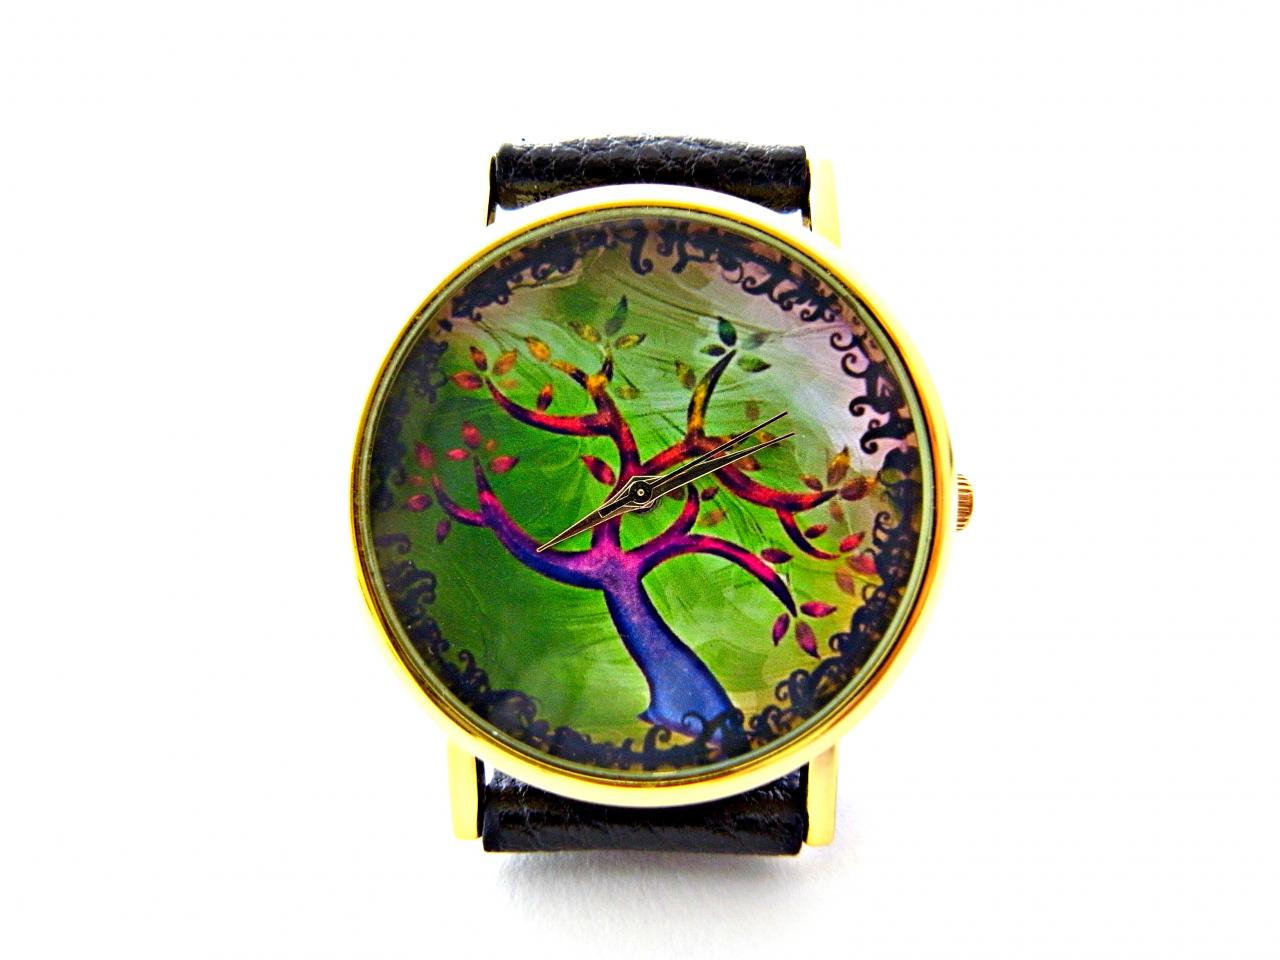 Tree Leather Wrist Watches, Woman Man Lady Unisex Watch, Genuine Leather Handmade Unique Watch #3